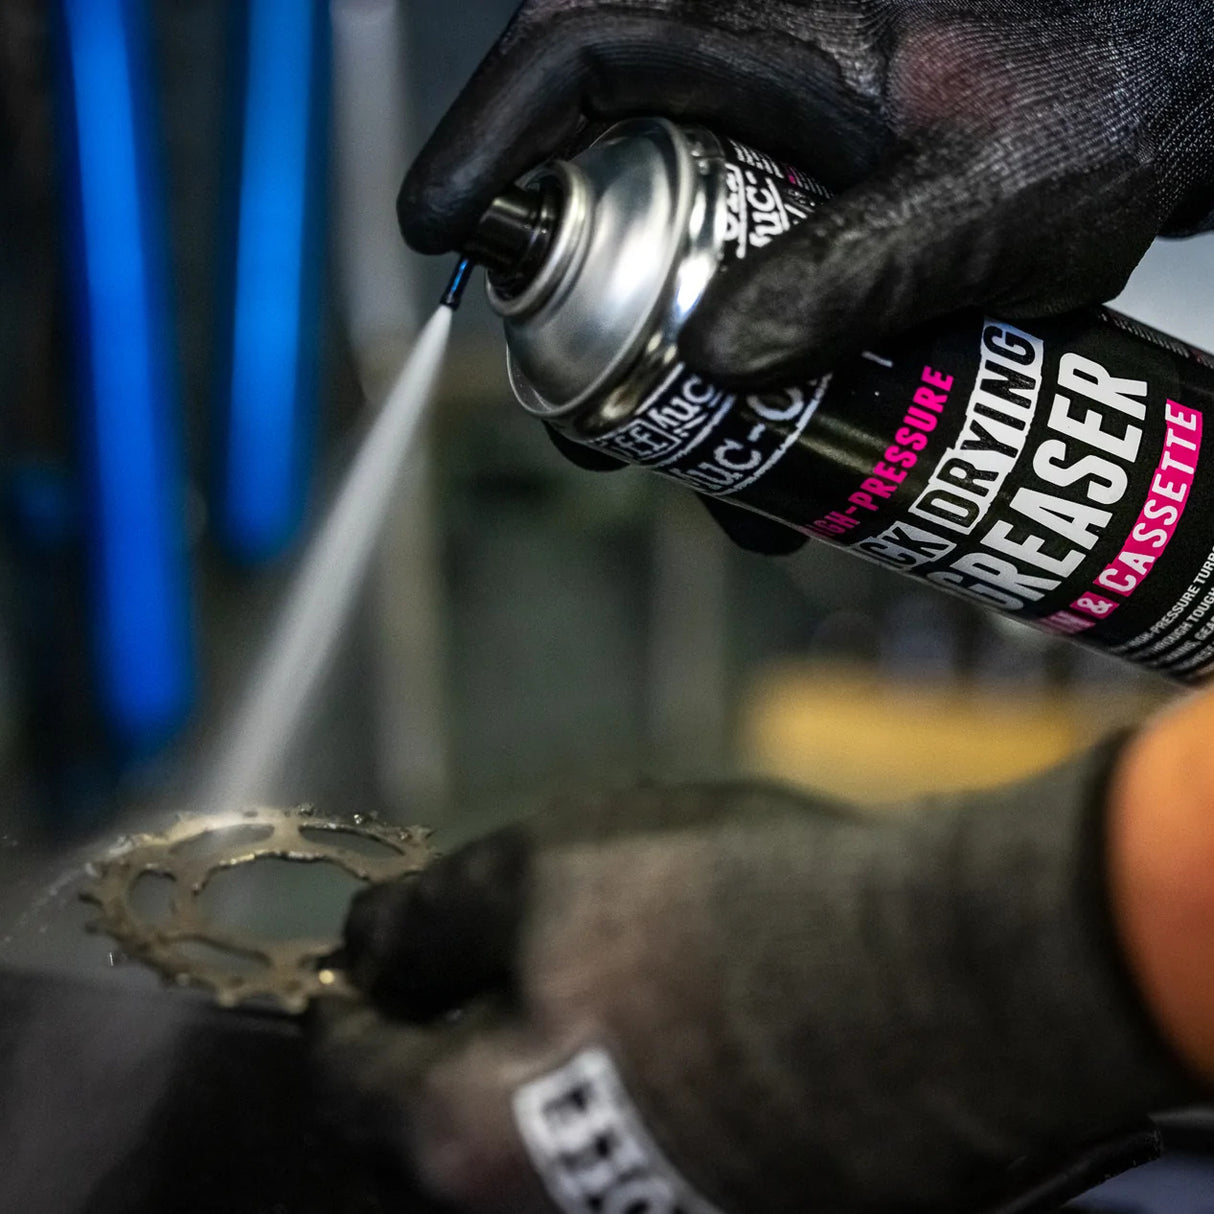 MUC-OFF HIGH PRESSURE QUICKDRY DEGREASER CHAIN & CASSETTE (750ML)